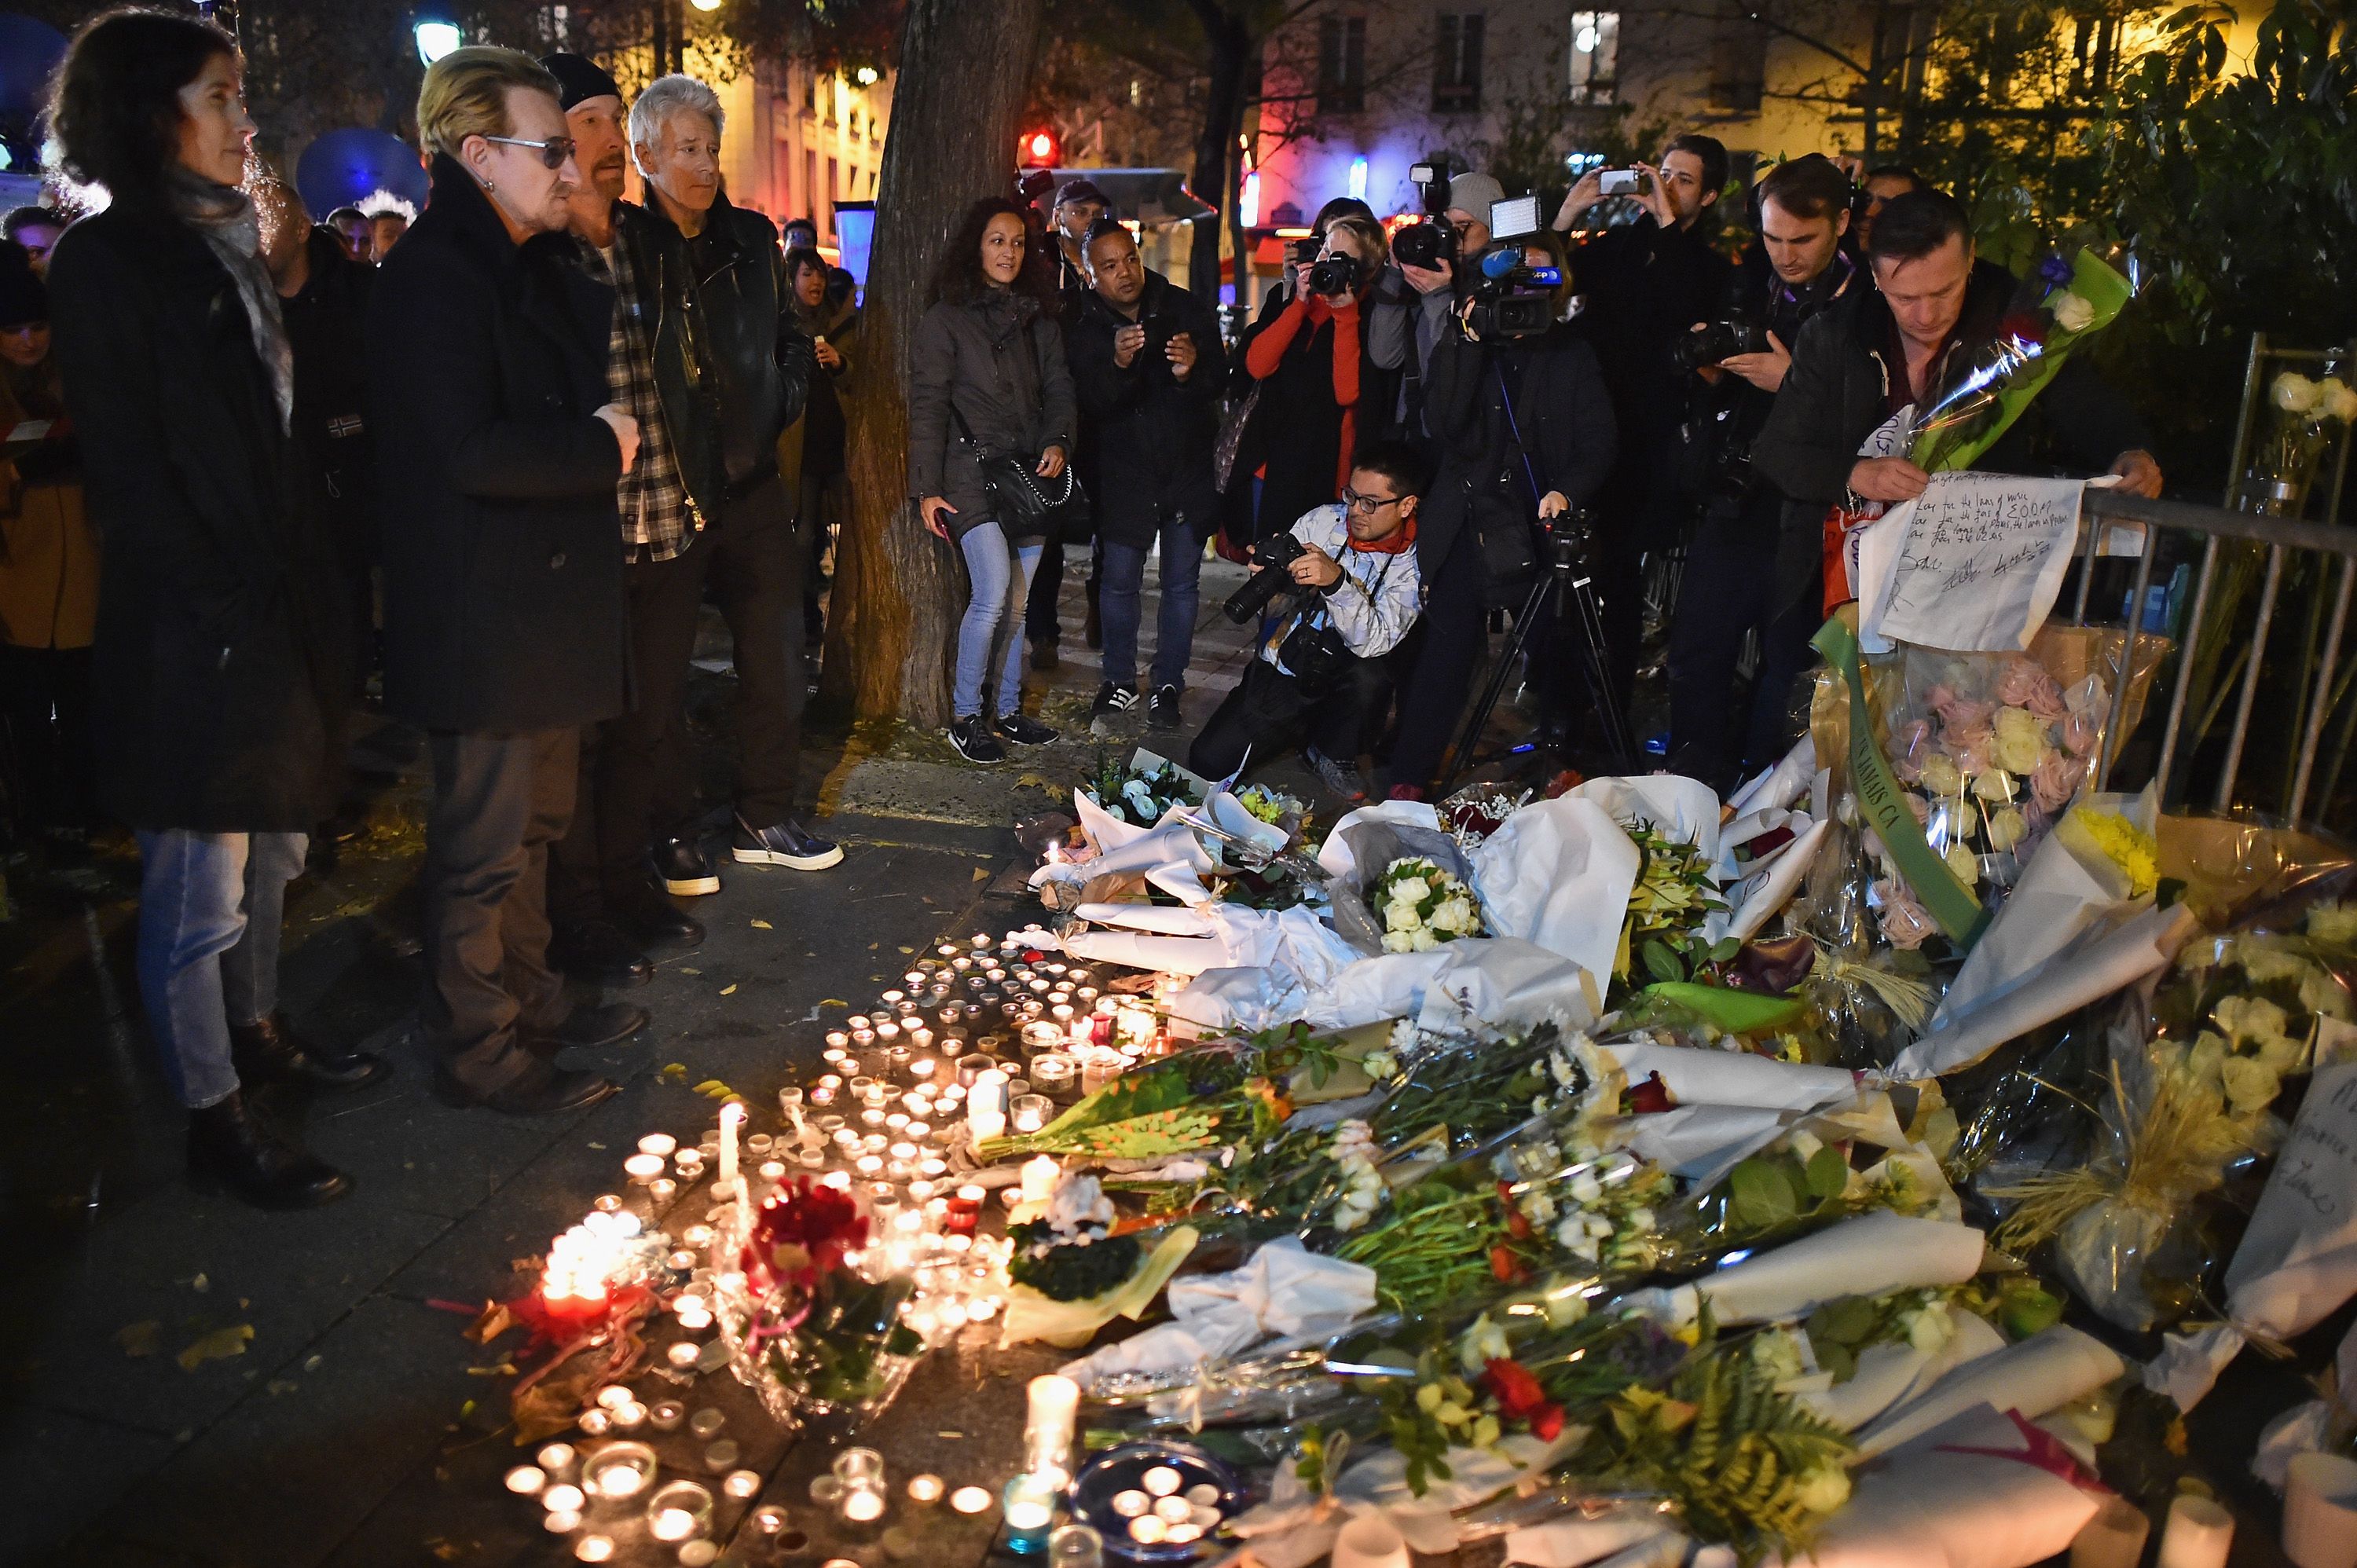 PARIS, FRANCE - NOVEMBER 14: Bono and The Edge of U2 place flowers on the pavement near the scene of yesterday's Bataclan Theatre terrorist attack on November 14, 2015 in Paris, France. At least 120 people have been killed and over 200 injured, 80 of which seriously, following a series of terrorist attacks in the French capital. (Photo by Jeff J Mitchell/Getty Images)